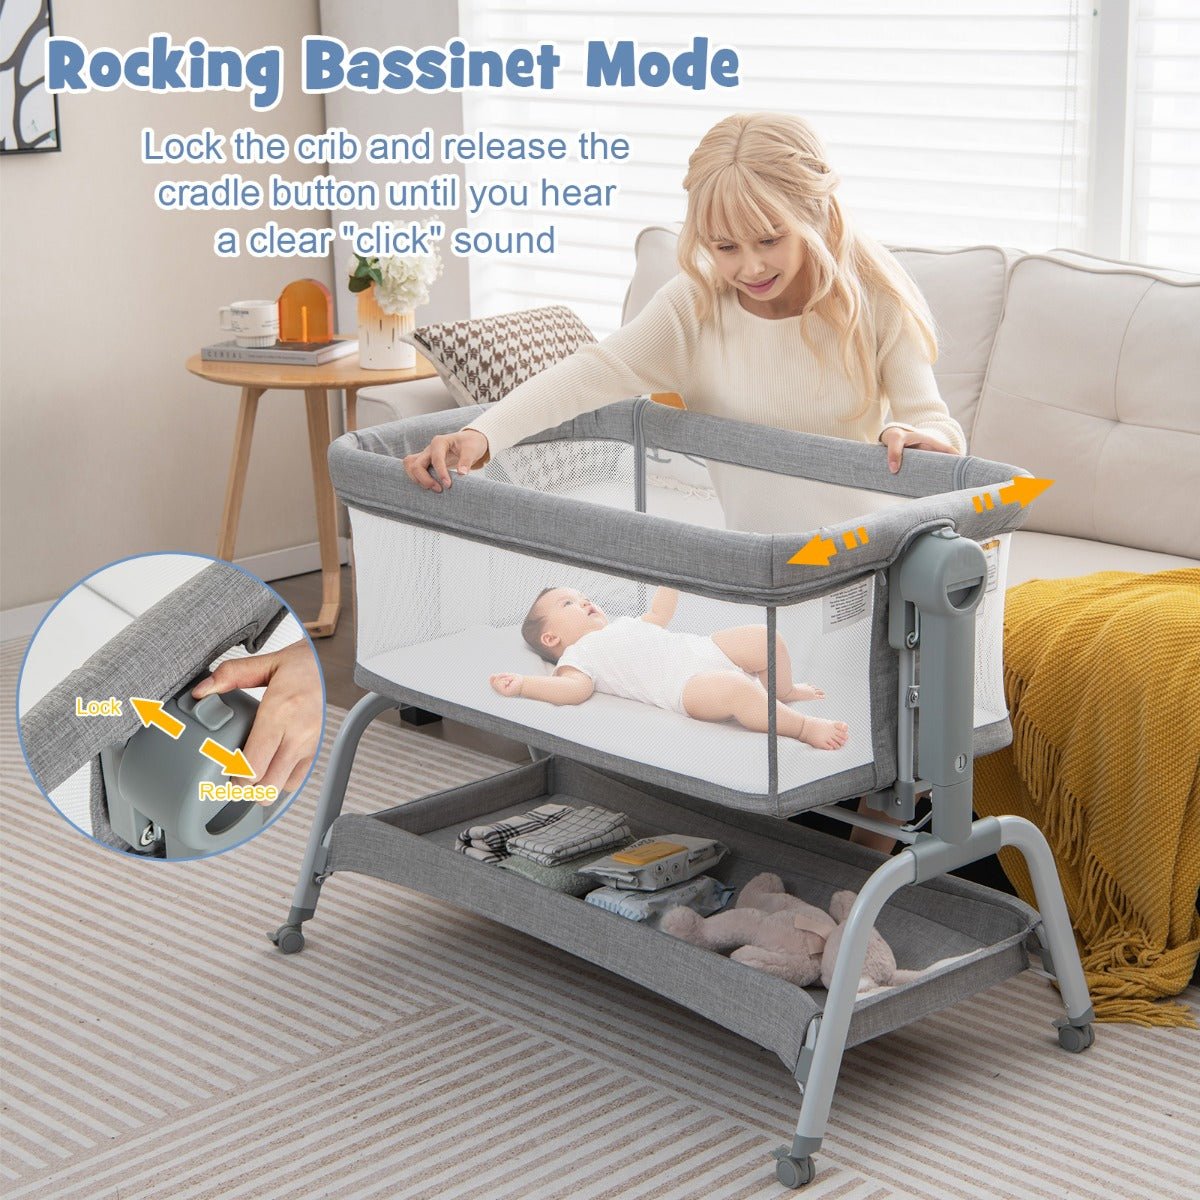 Get Travel-Ready: Grey 3-in-1 Travel Cot with Multiple Functions